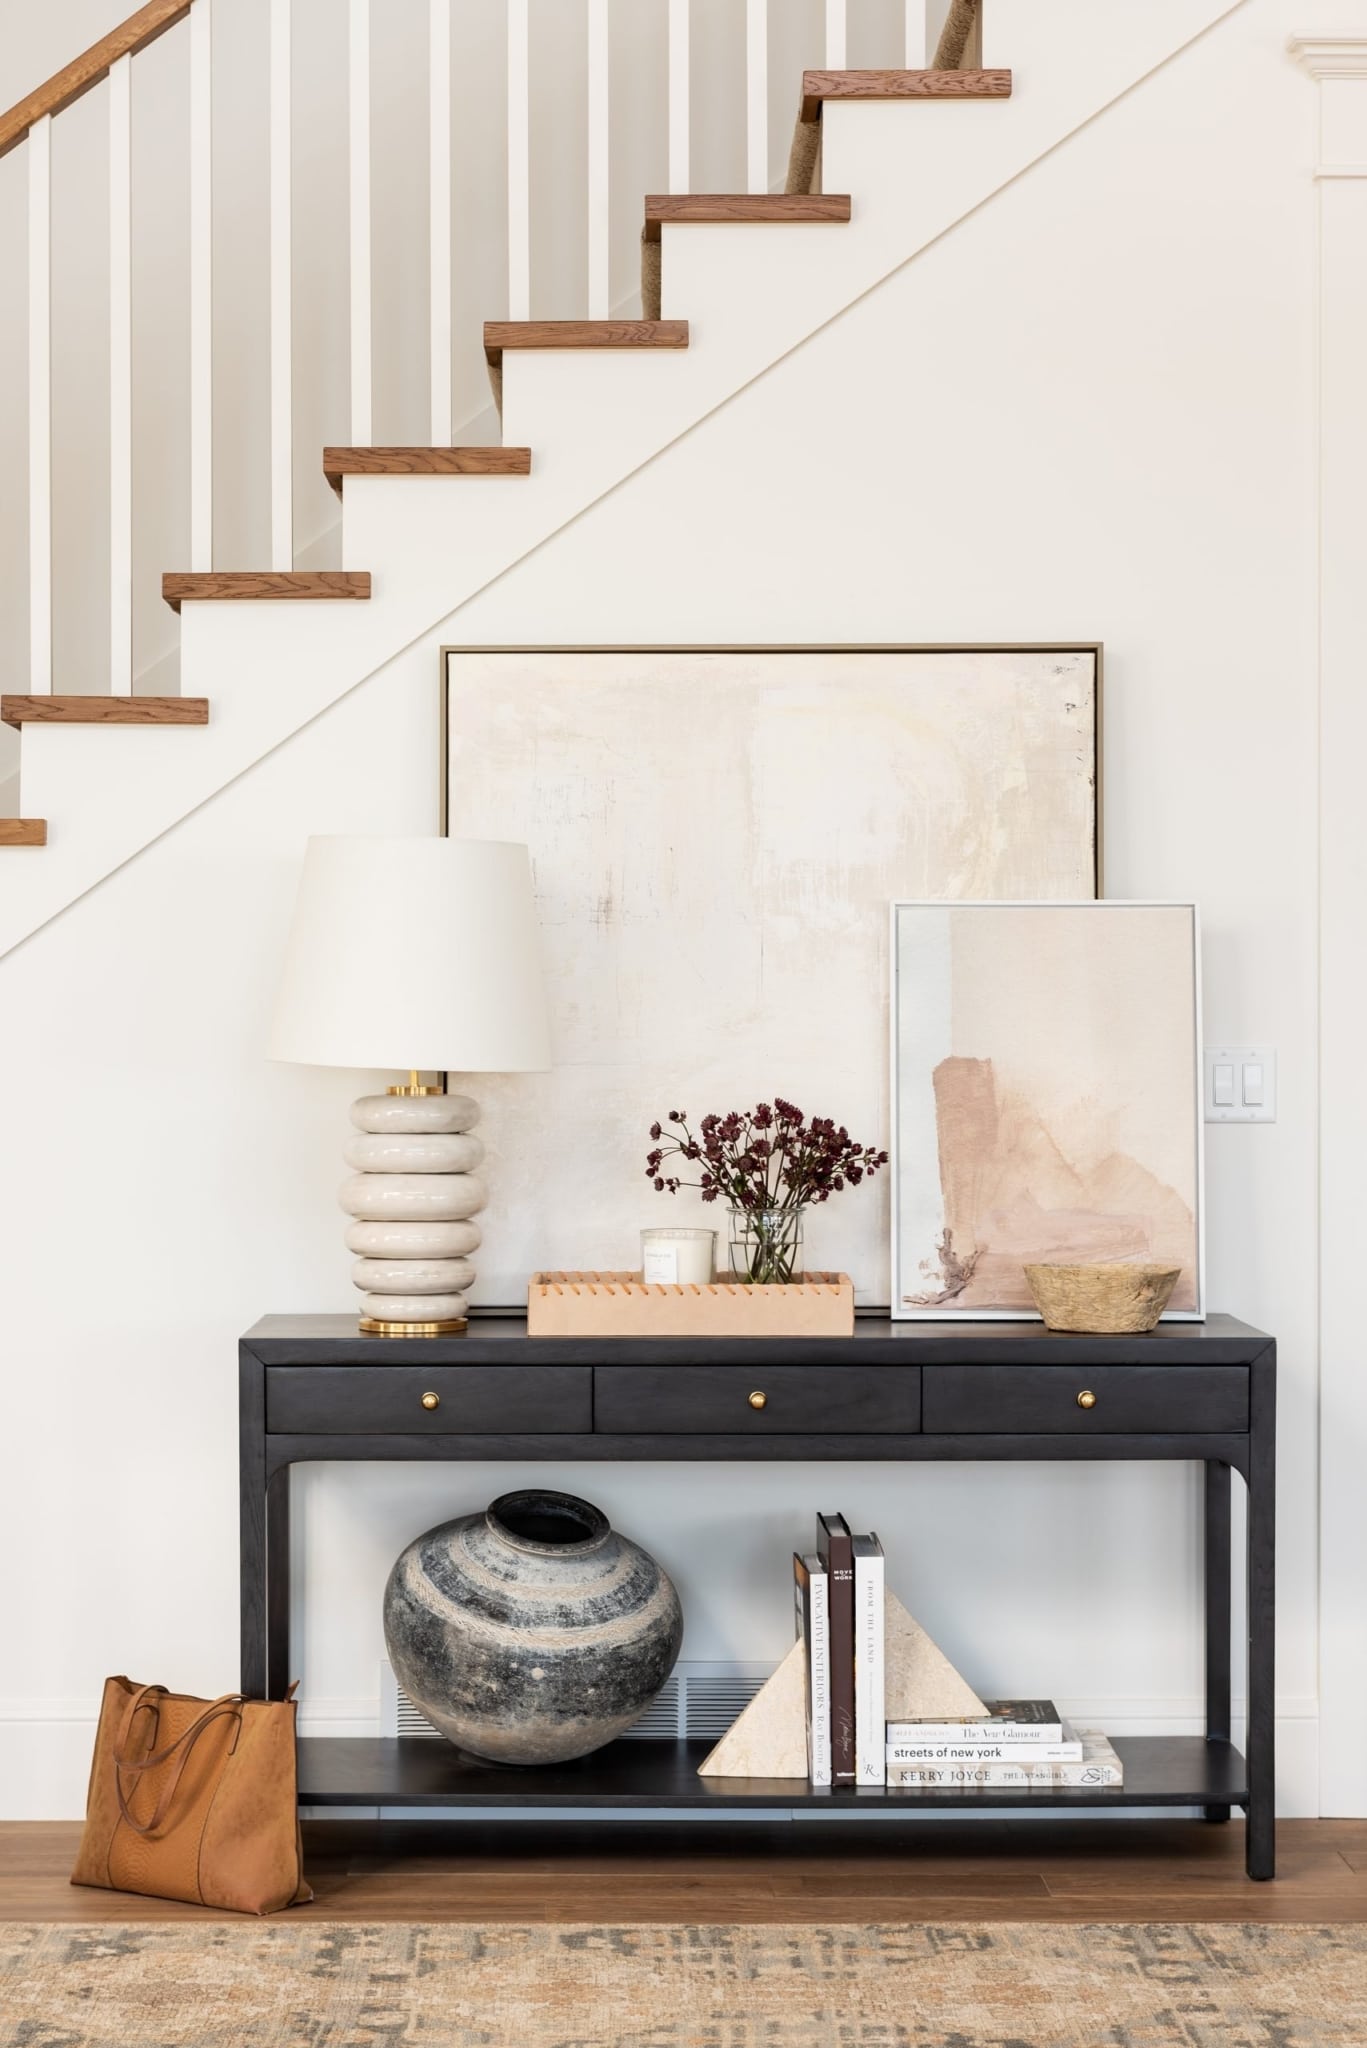 Creating a welcoming foyer with Studio McGee. Love the abstract art, lamp and beautiful decorative accessories. interiors | interior design | home decor | home design | foyer design | foyer decor | foyers | decor |